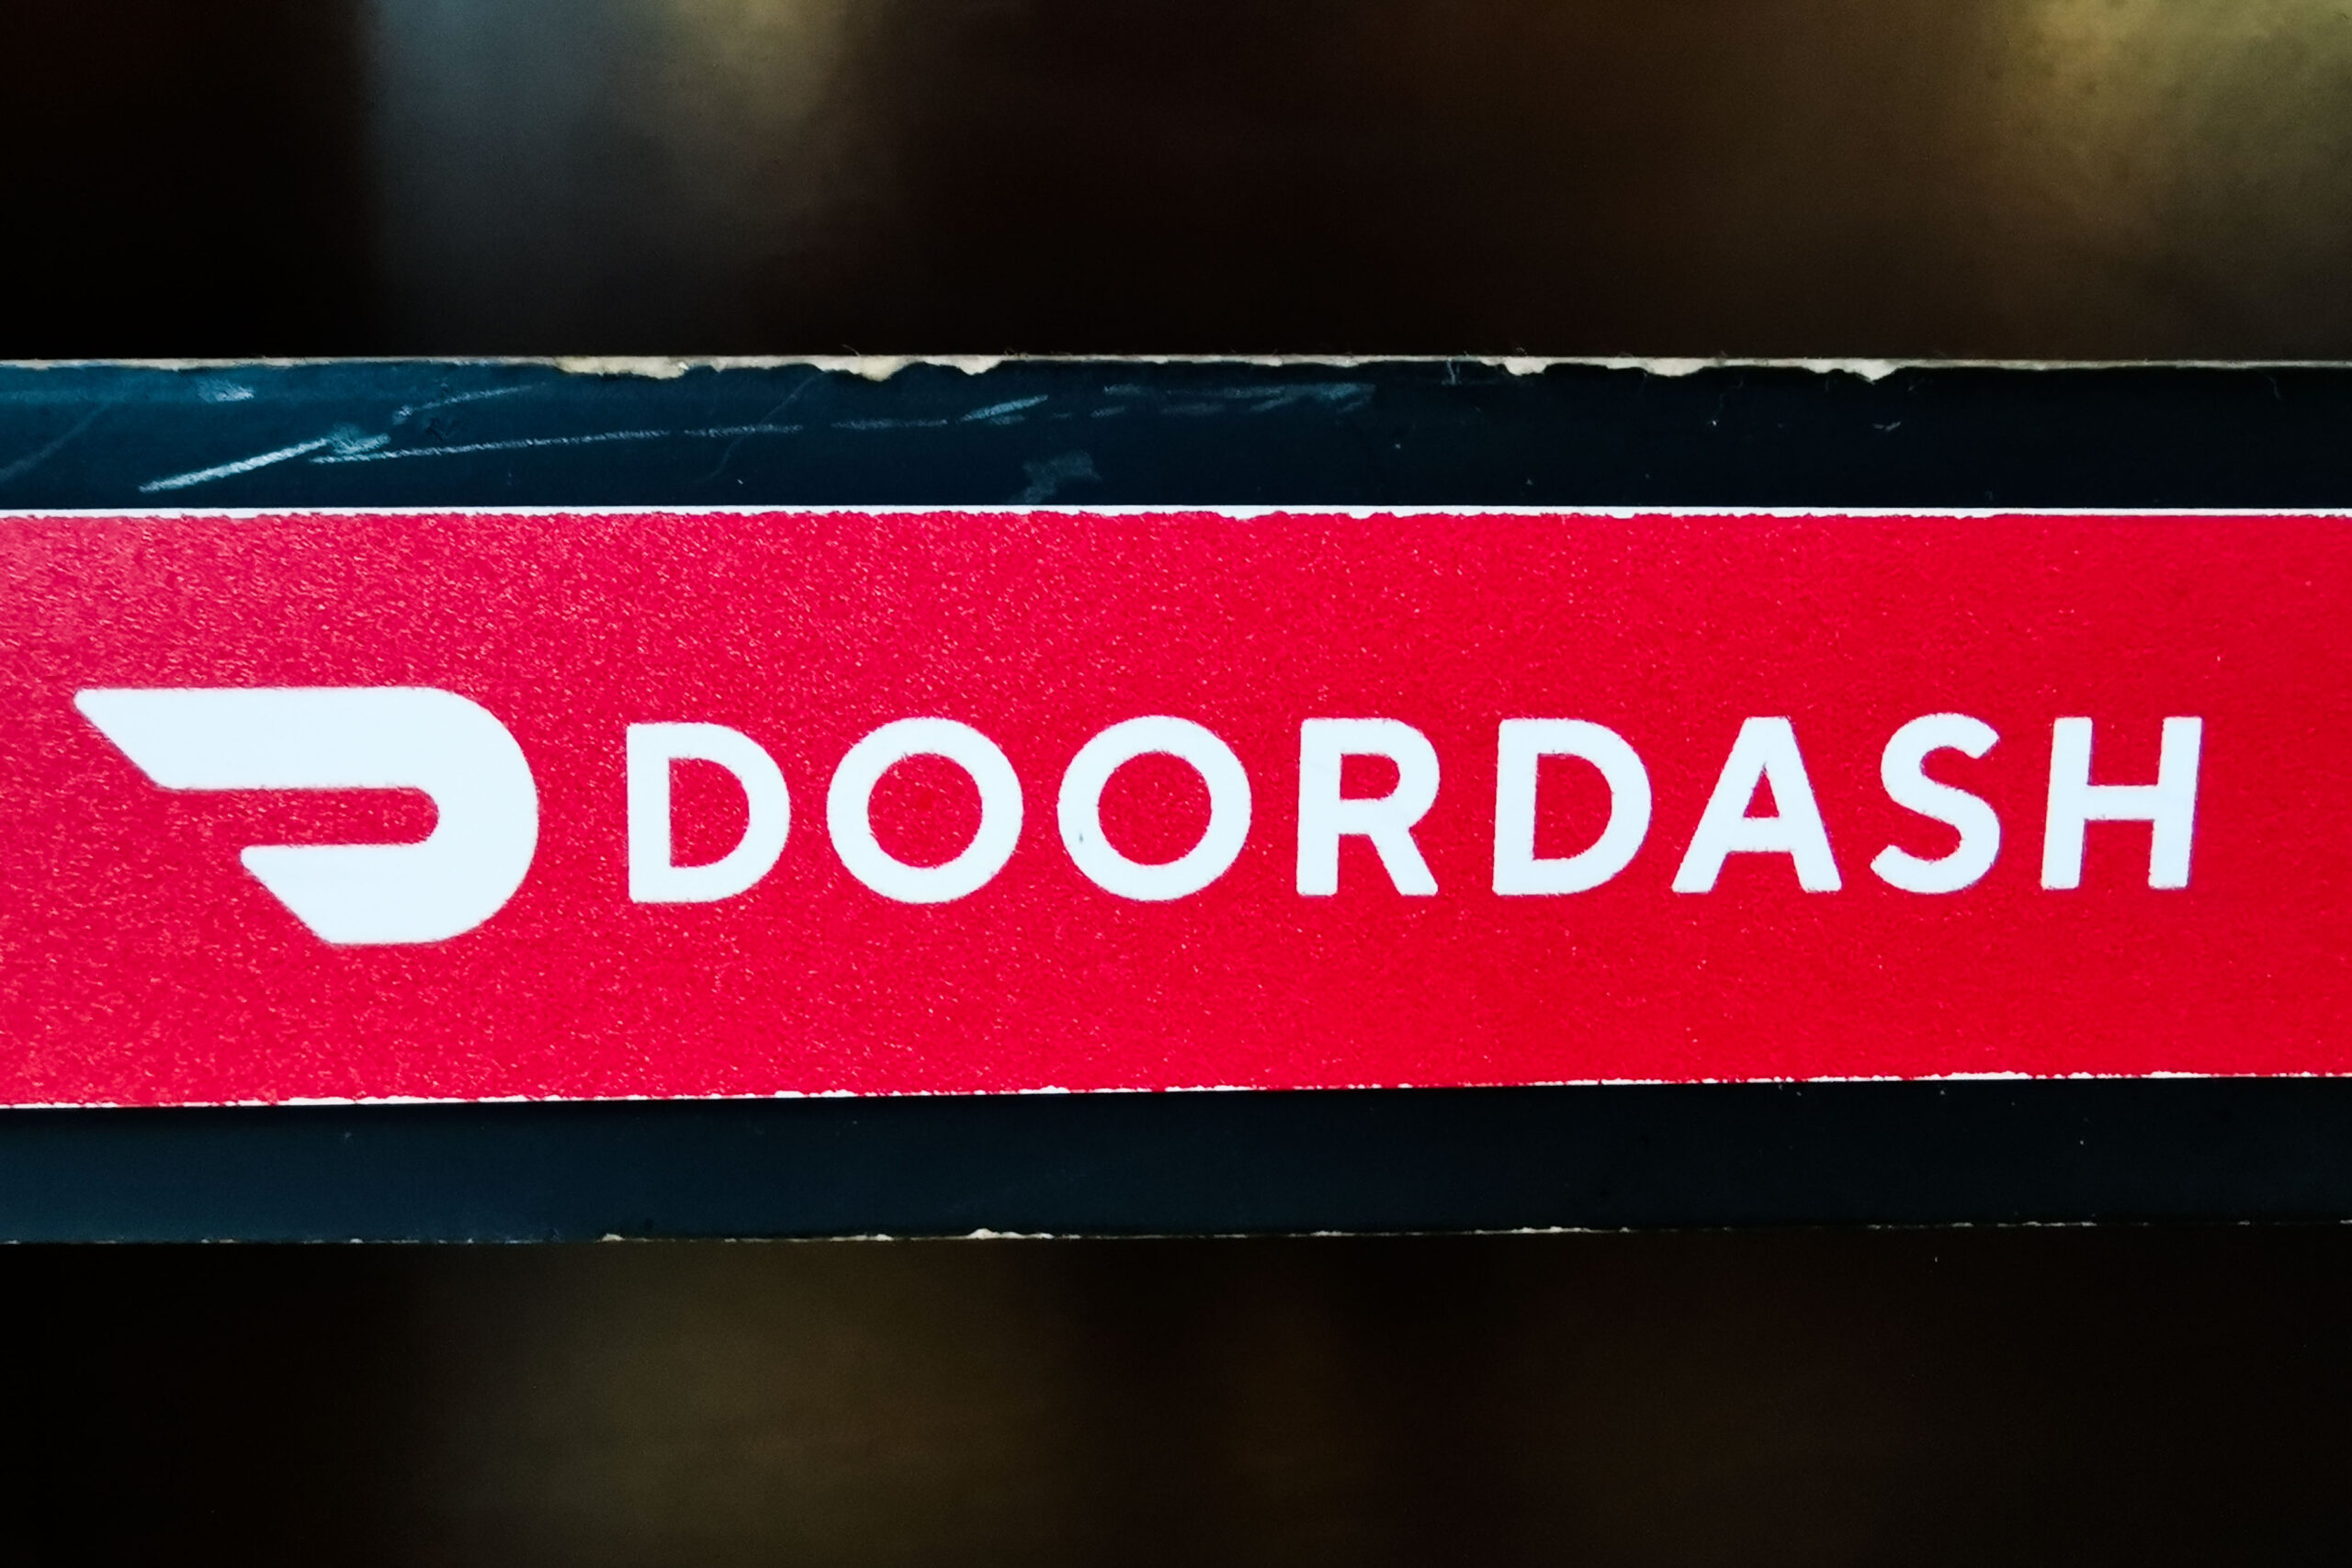 A DoorDash driver was kidnapped and sexually assaulted while making a delivery at a Florida hotel. The victim, a woman, was left traumatized by the horrific incident.